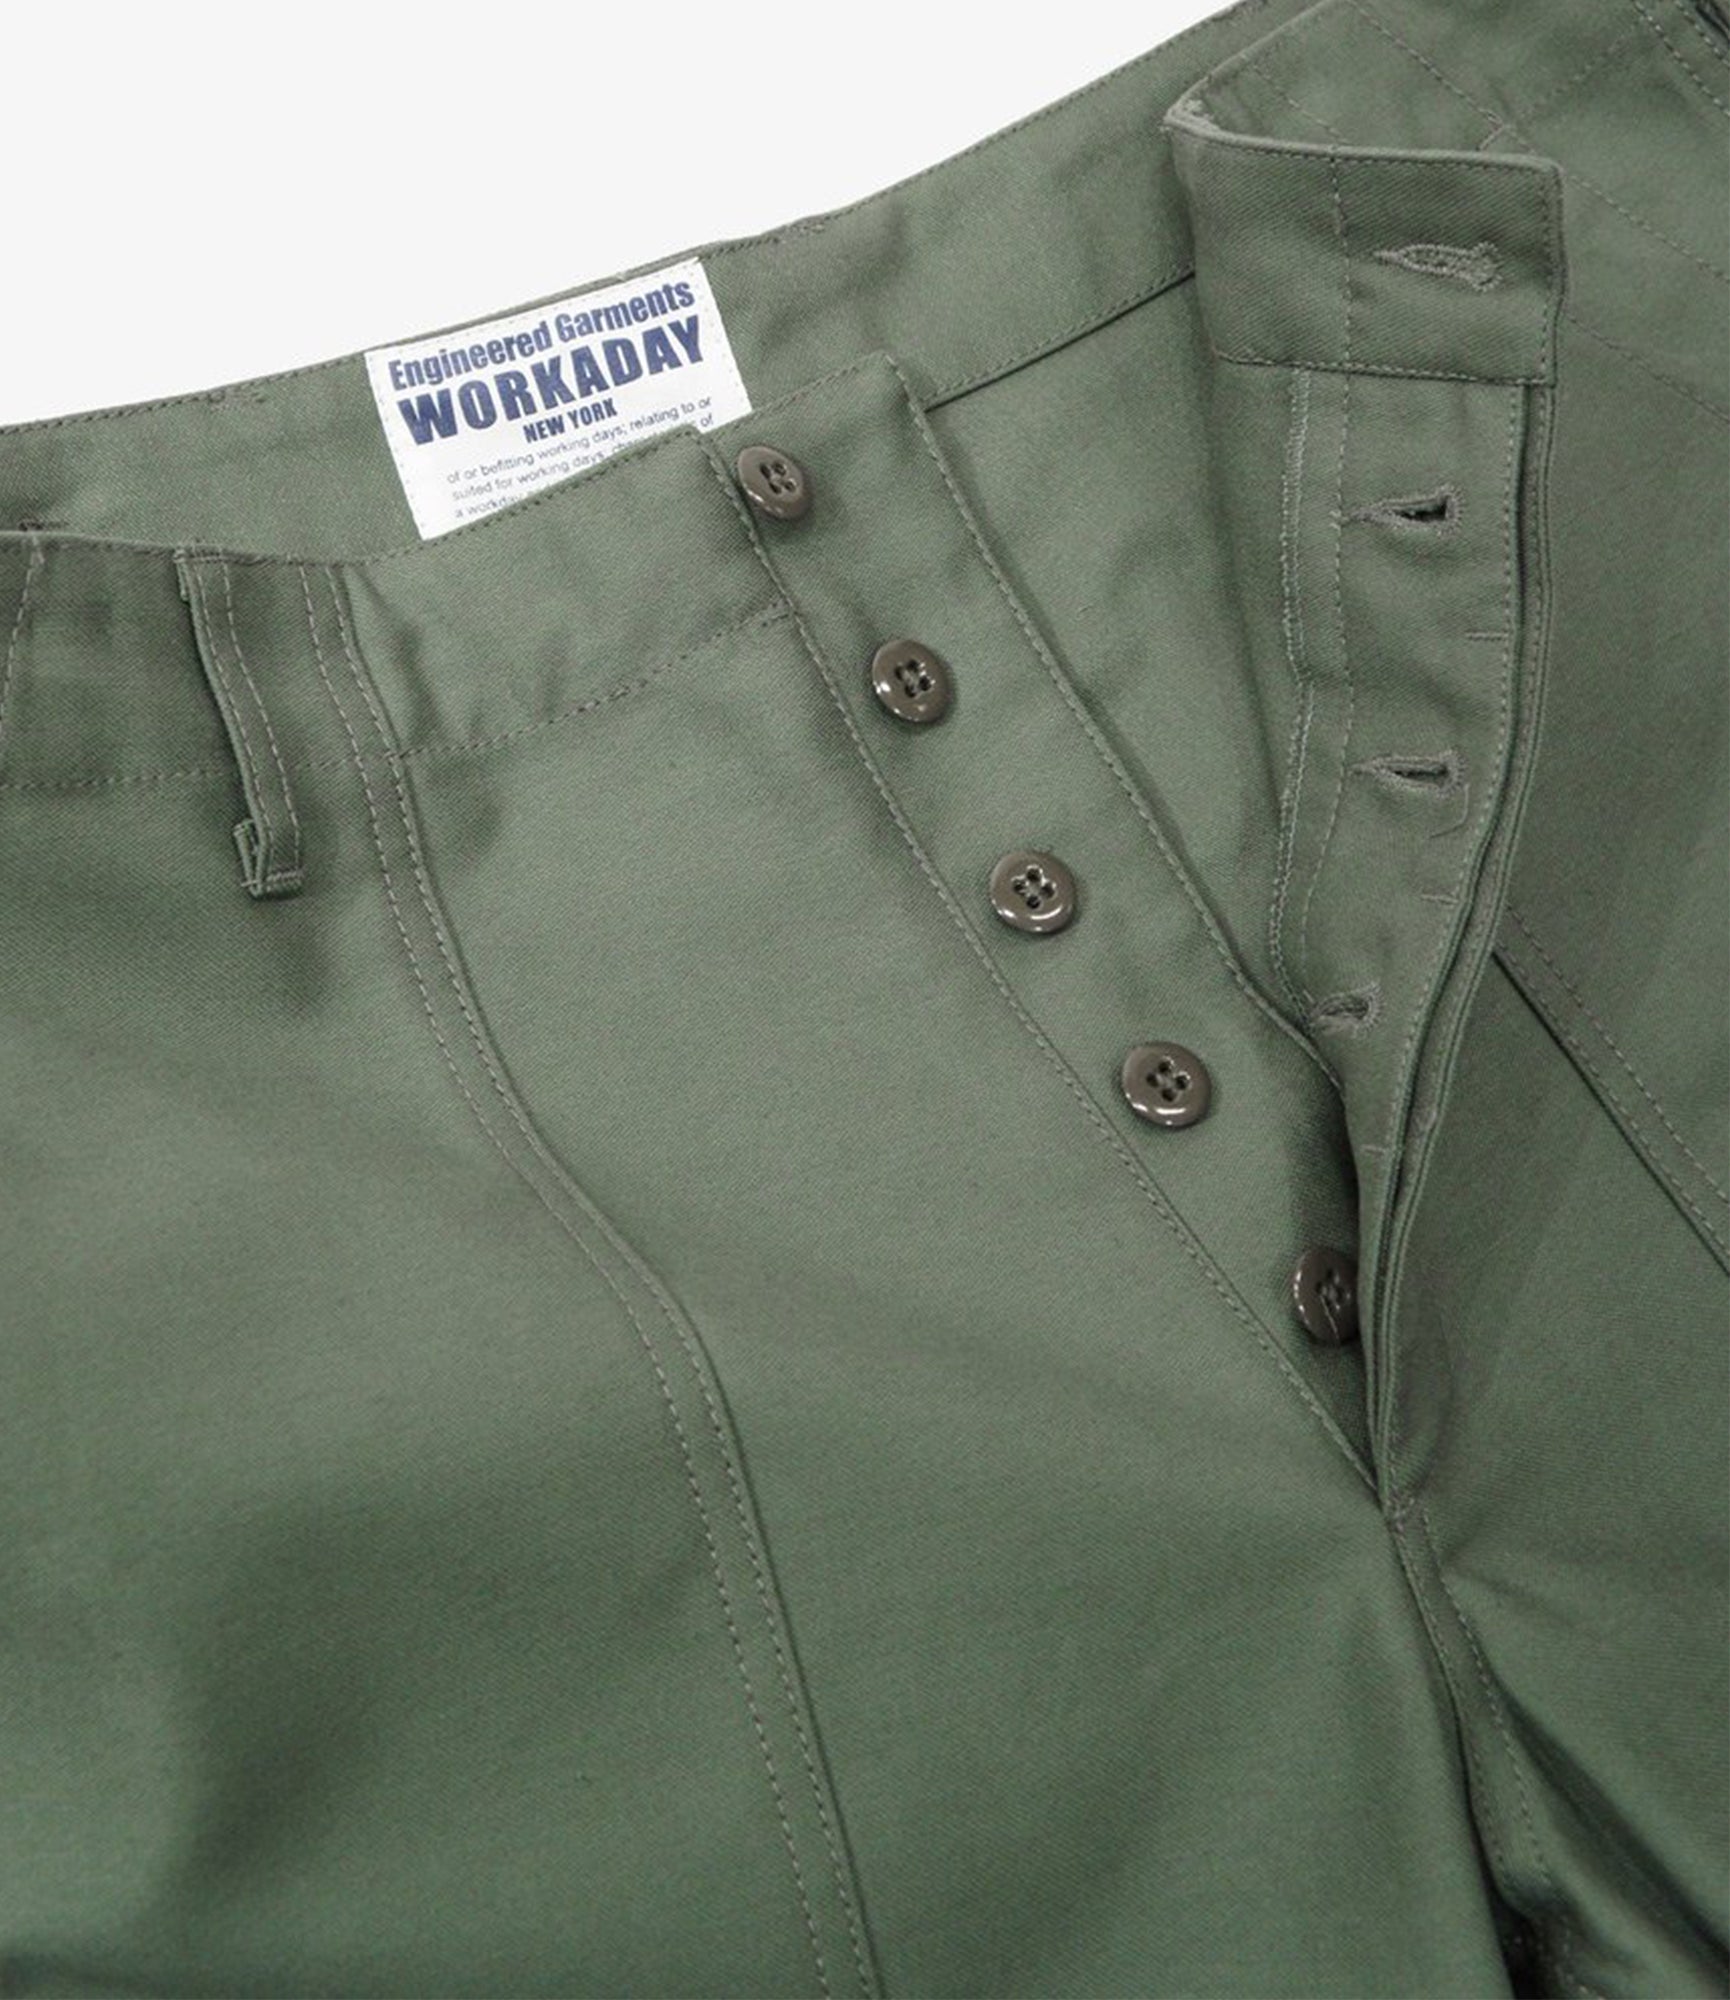 Engineered Garments Workaday Fatigue Pant - Olive Cotton Reversed Sateen